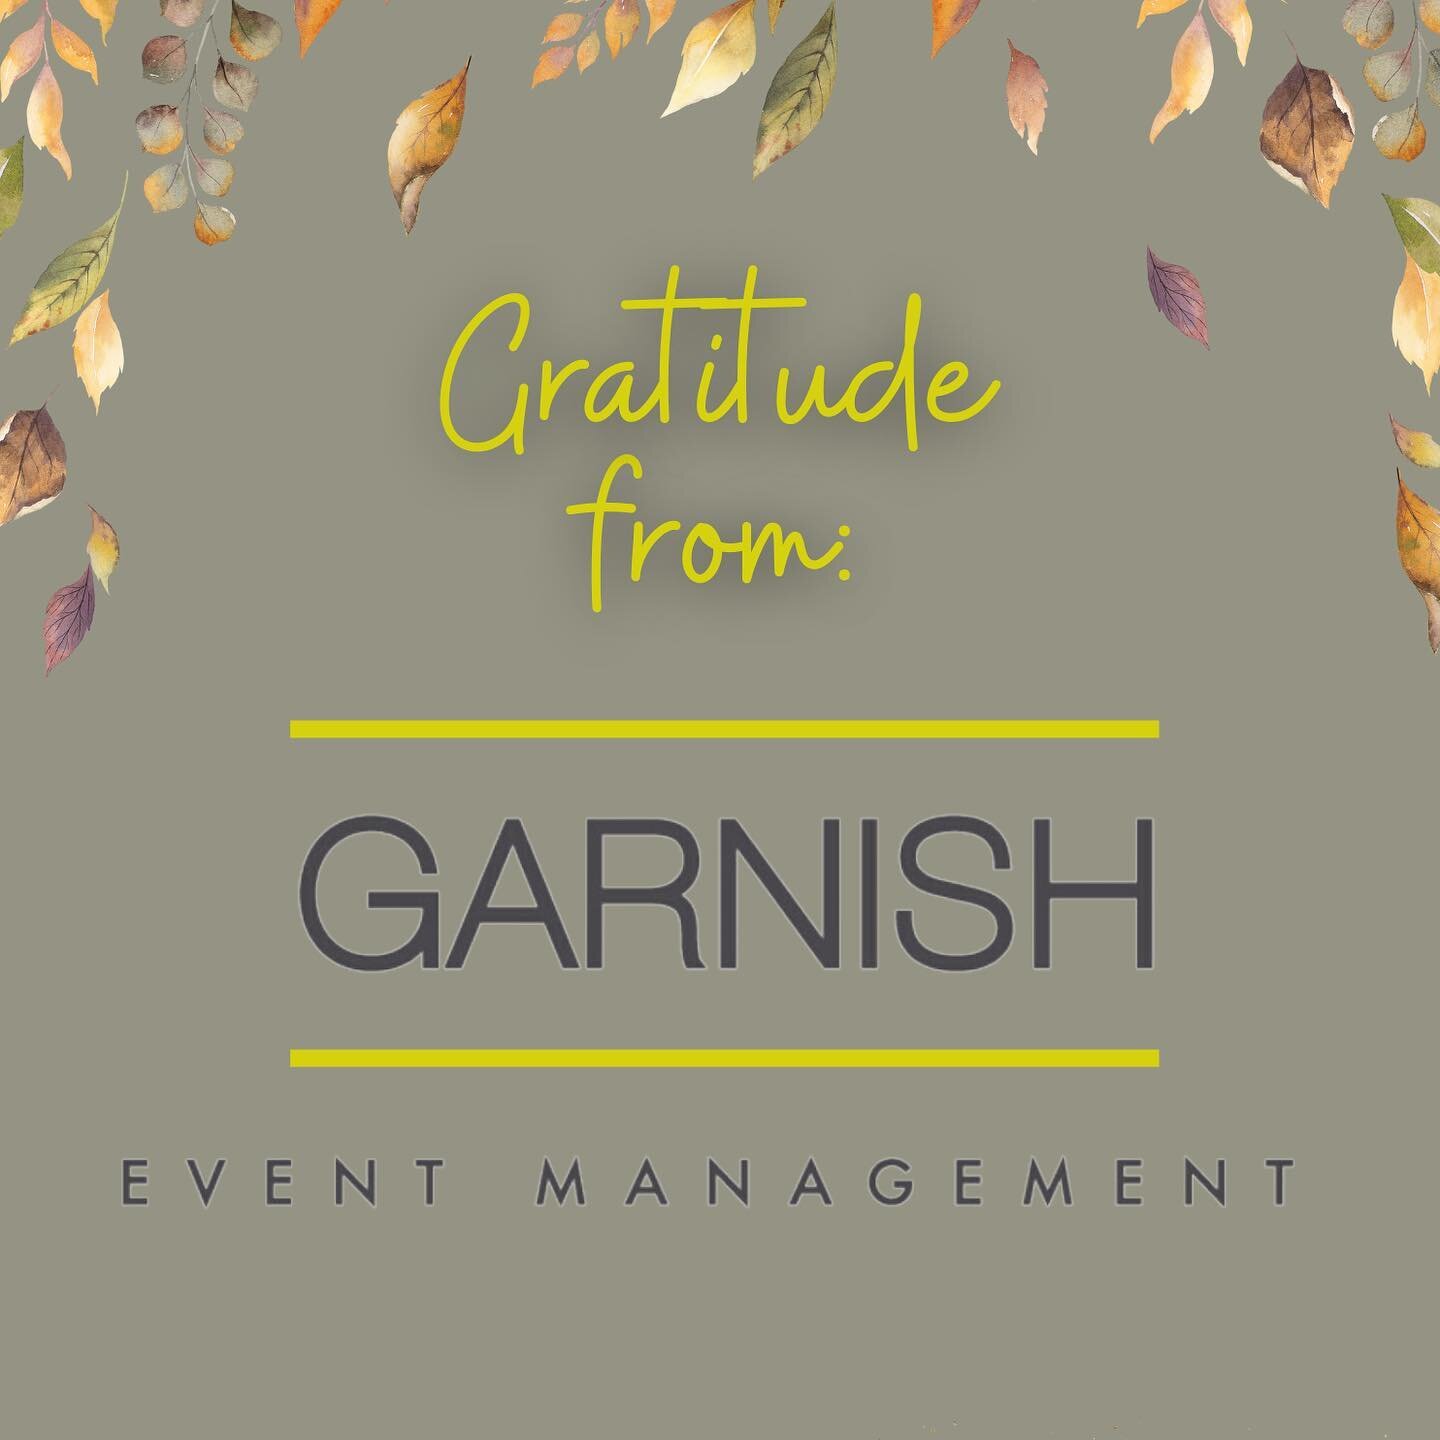 Today, we express our gratitude to the many organizations and individuals who have made Garnish what it is today. To everyone who has played a part in our growth, past, present, and future &ndash; thank you. We extend our appreciation to our clients,